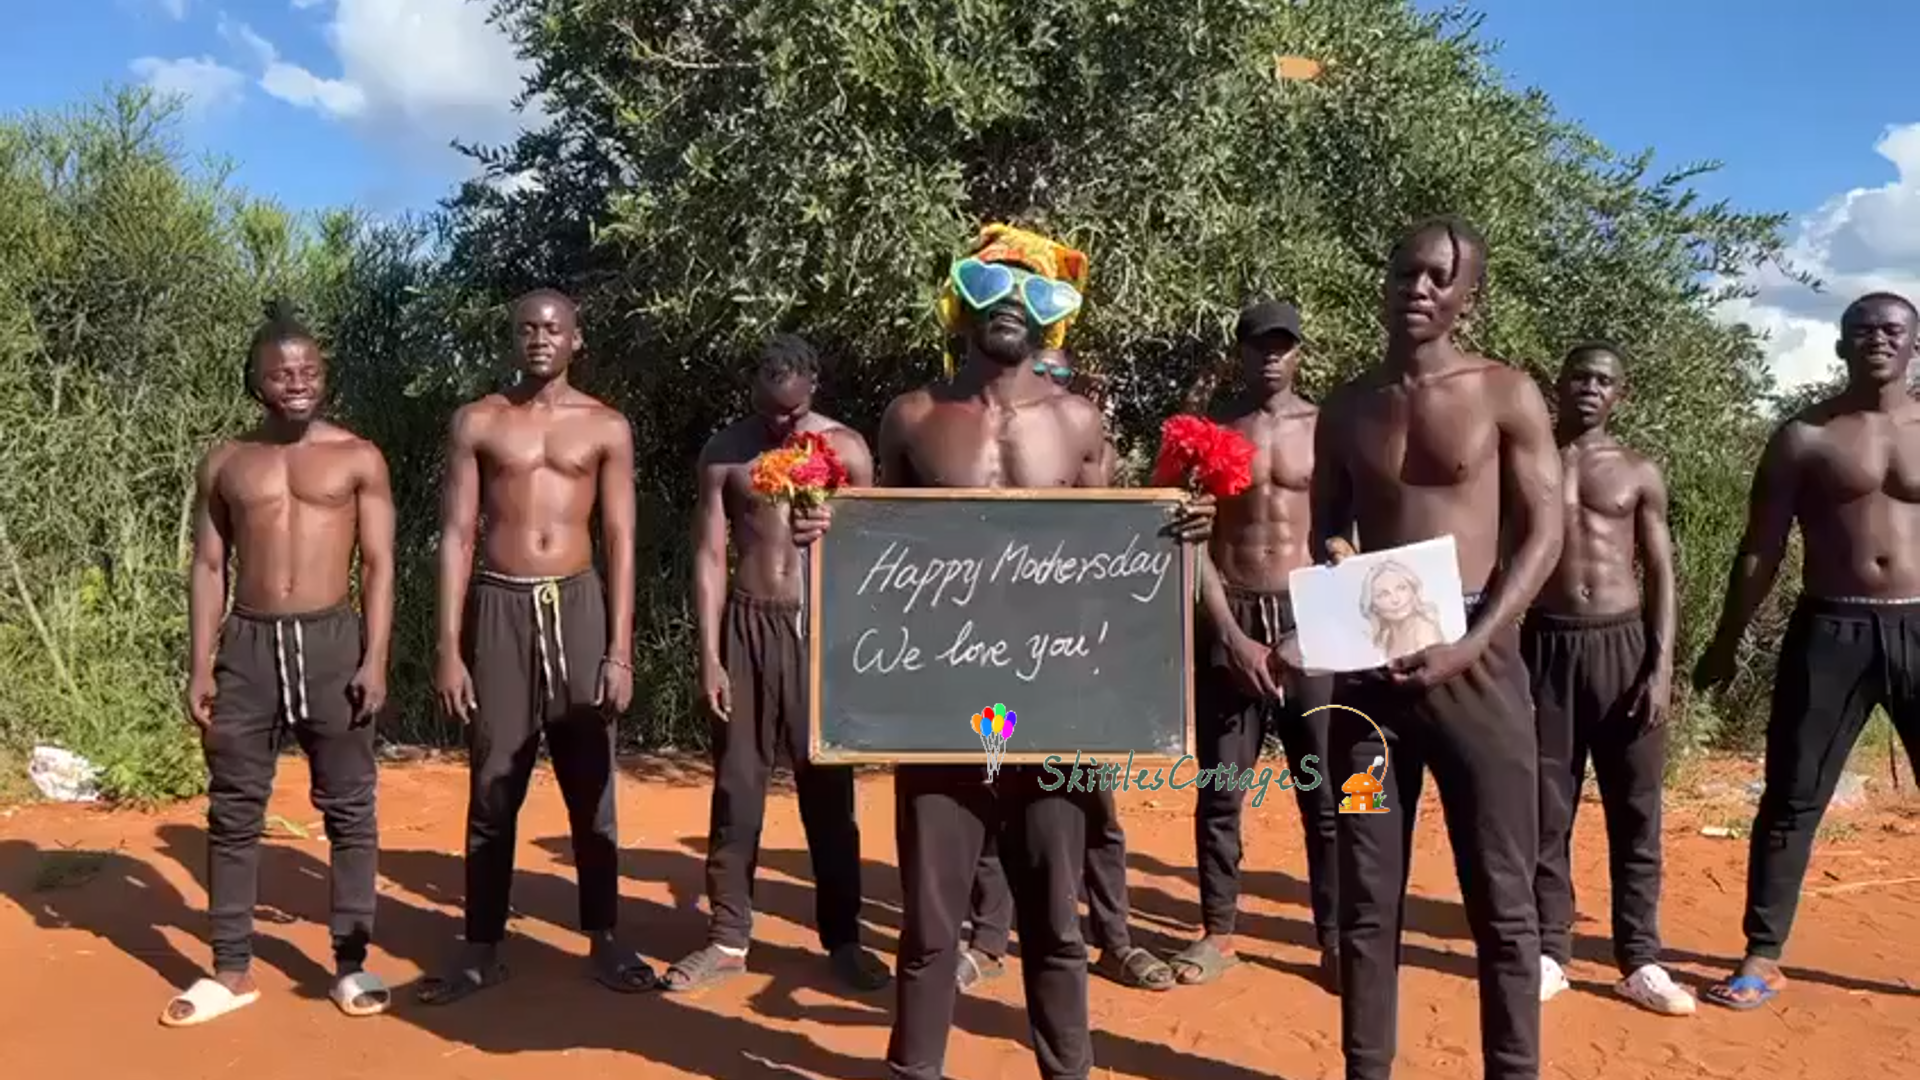 Greetings Video from Africa - Harmony Spirits - Skittles Cottage